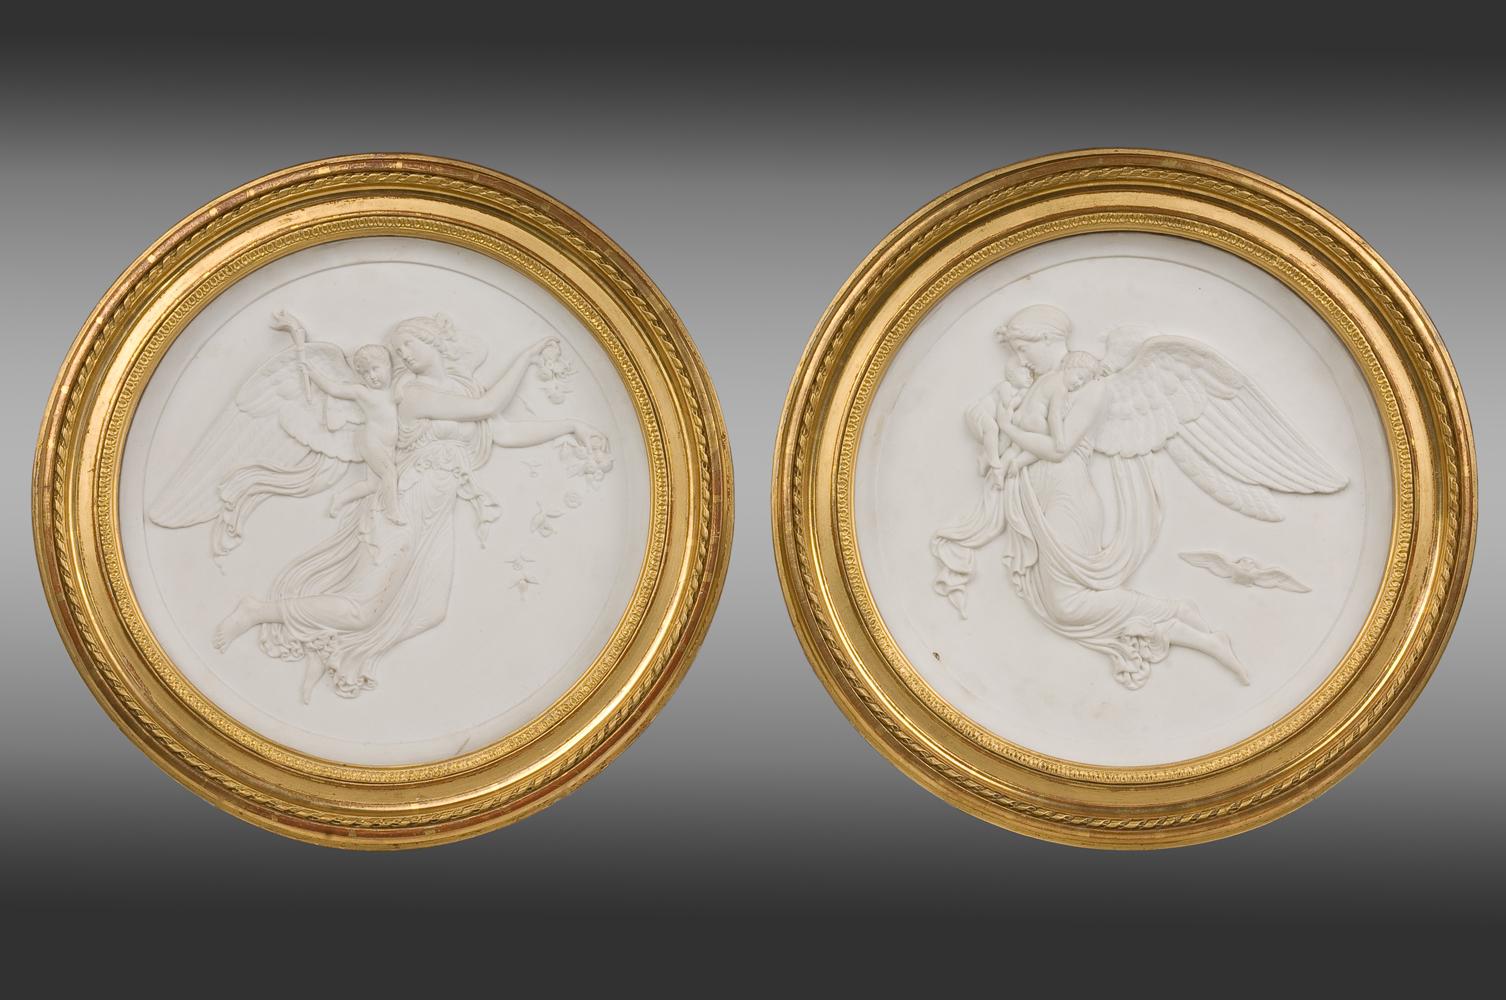 Antique Biscuit Medallions, 19th Century In Excellent Condition For Sale In Saint-Ouen, FR